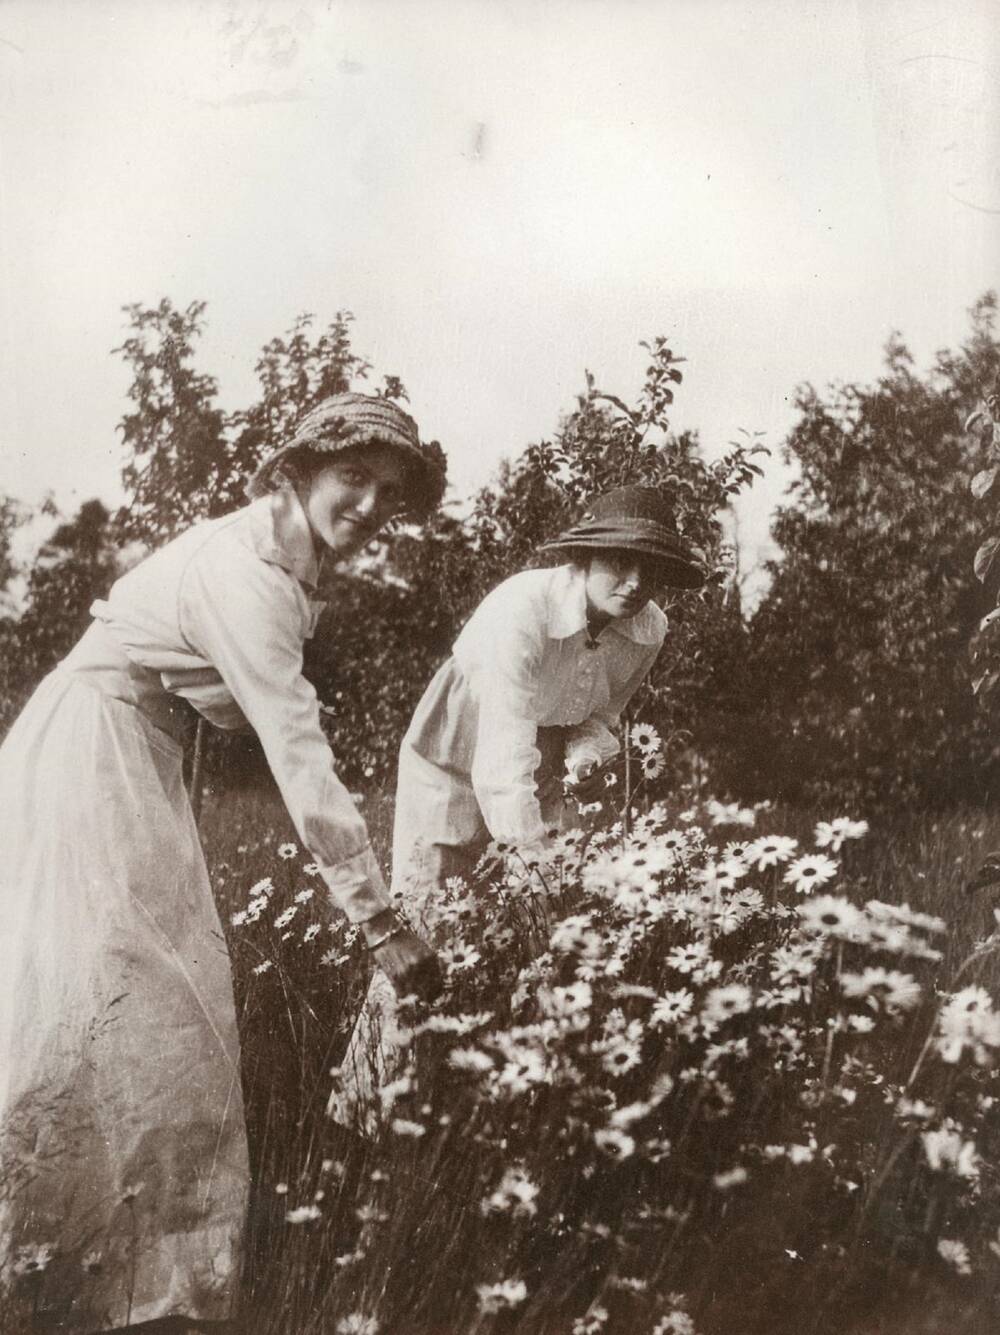 A black and white photo of two young Edwardian women, picking tall daisies in a garden with long grass. Both women wear long white dresses and darker hats with wide brims.